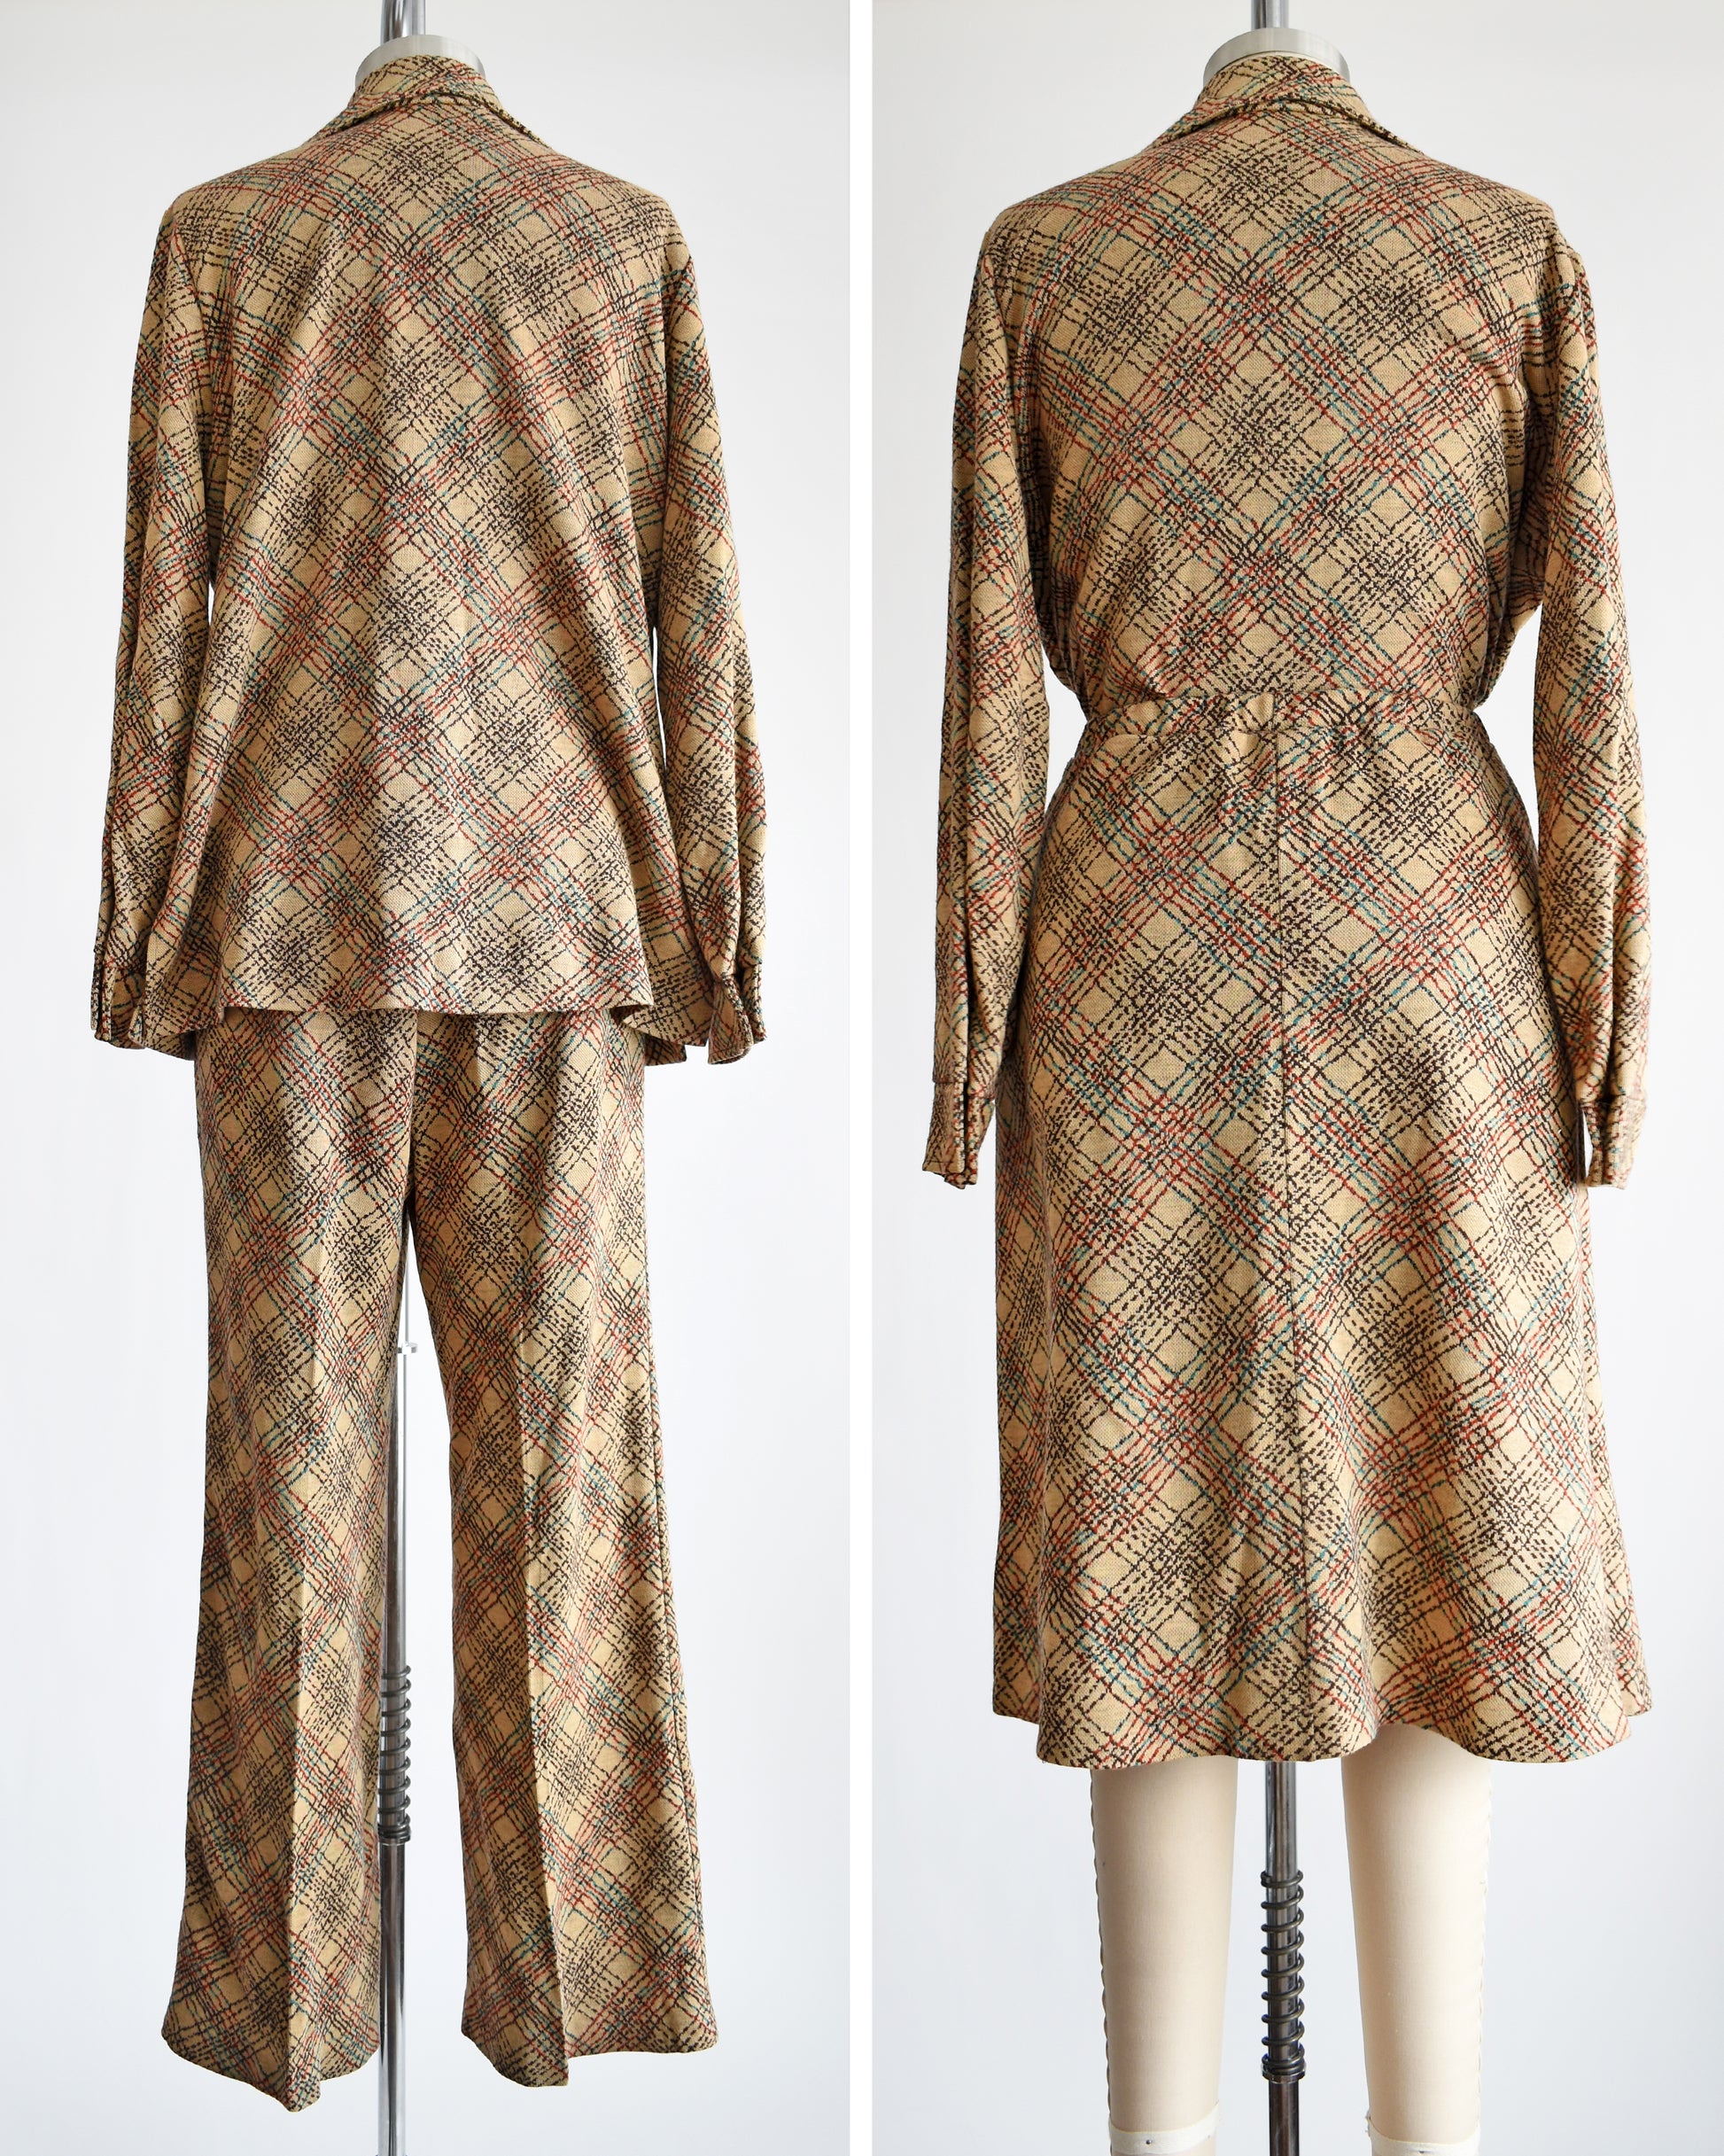 back views of a vintage 1970s brown plaid three piece set that comes with a matching blouse, skirt, and pants